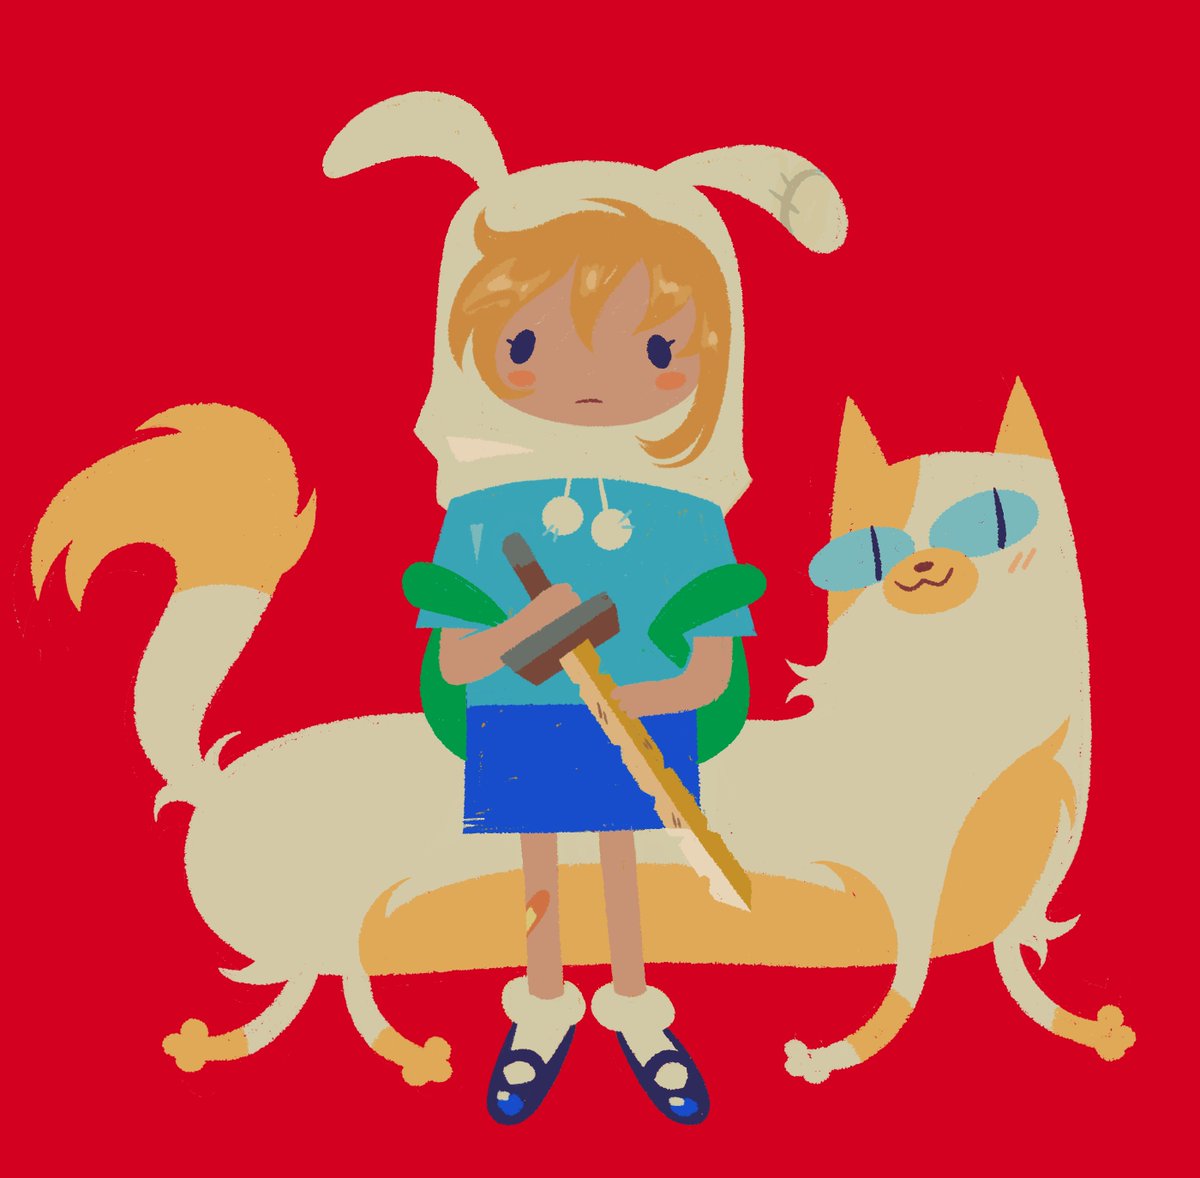 「fionna and cake .. 」|poppy 🌴🇵🇸のイラスト